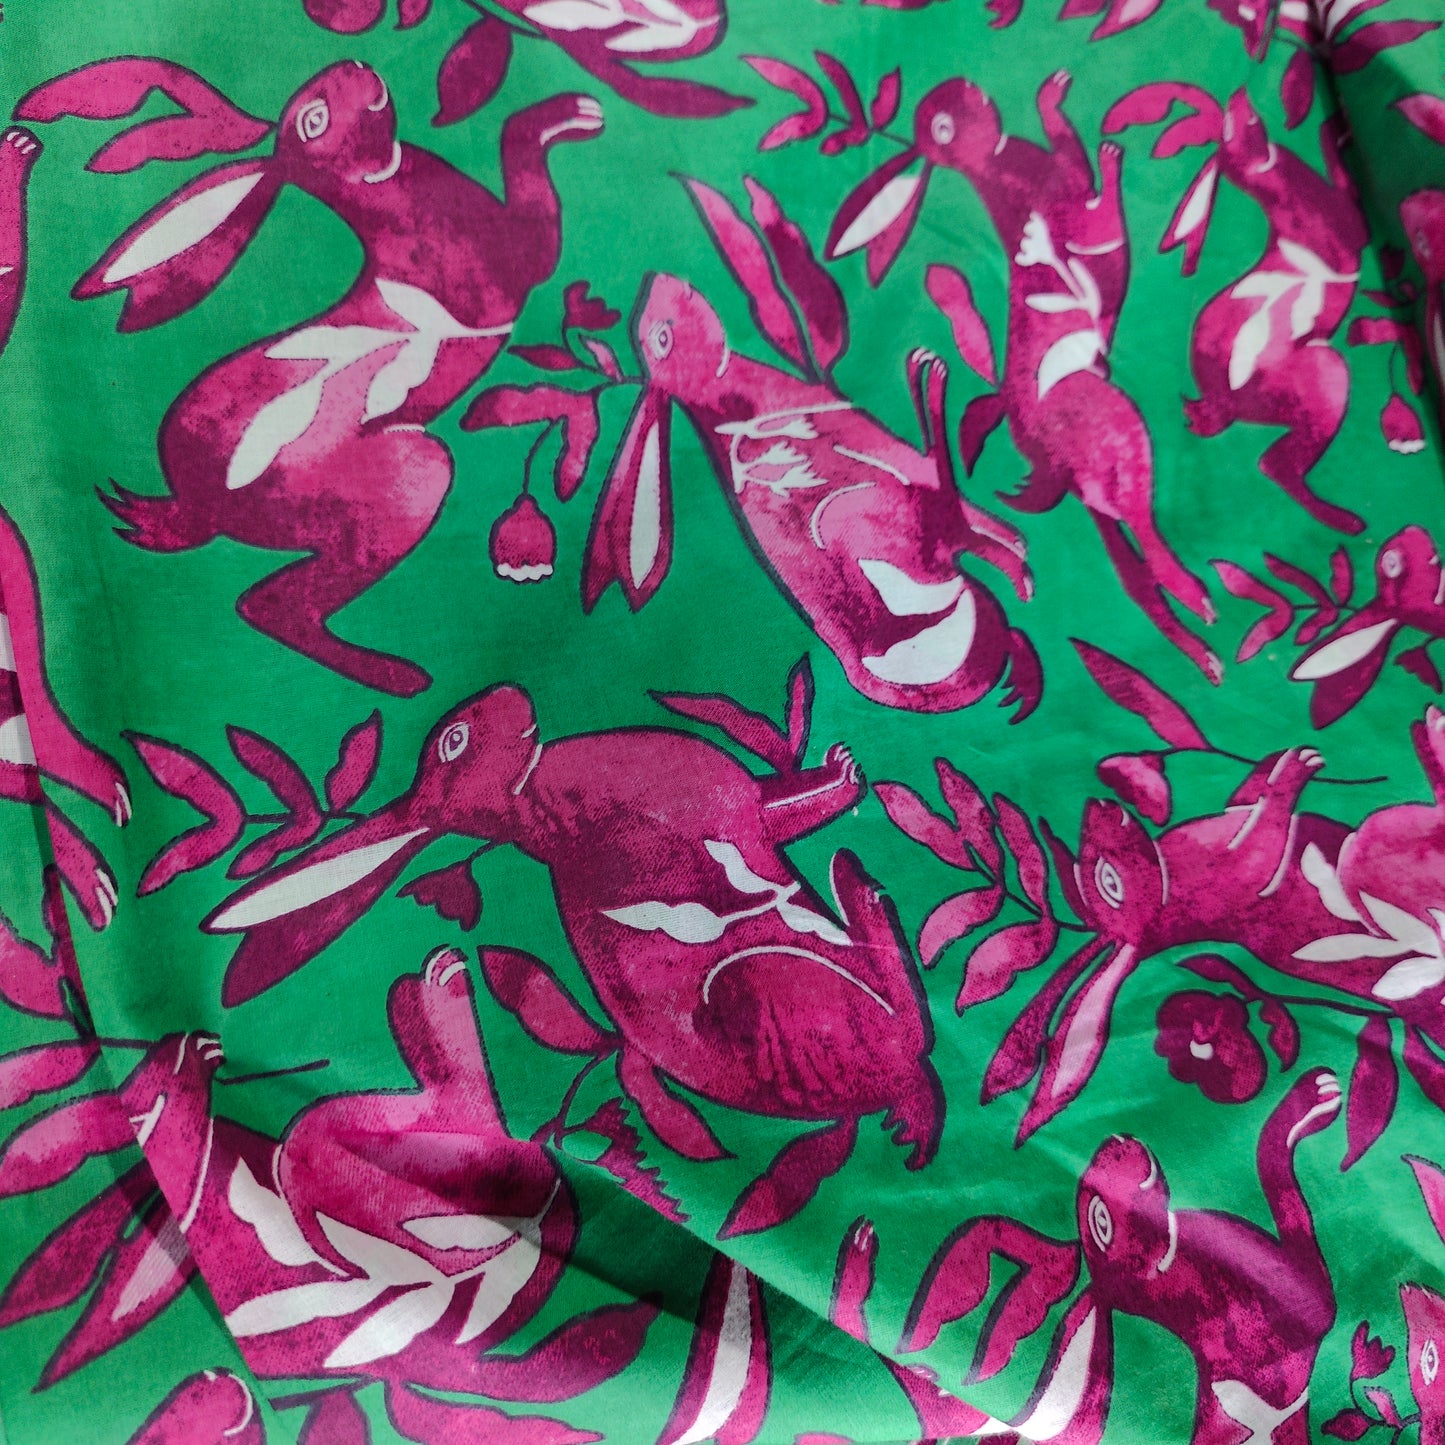 Wild Rabbit cambric fabric 44 inches width- Green and Pink